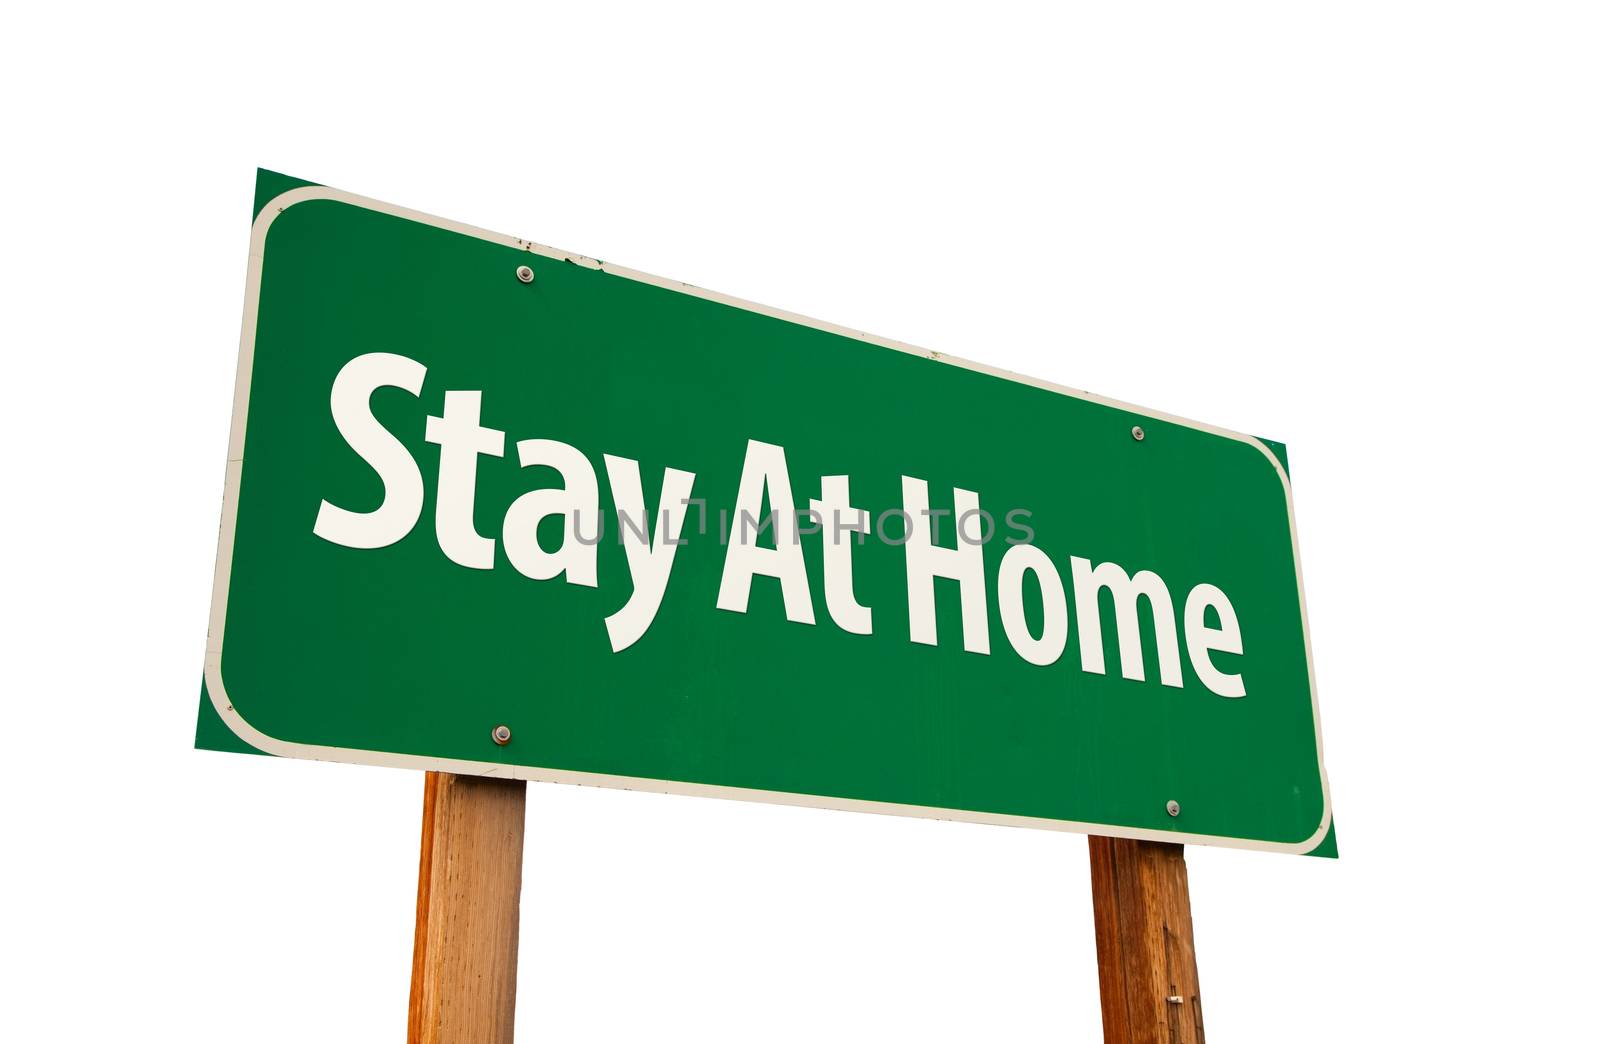 Stay At Home Green Road Sign Isolated On A White Background by Feverpitched